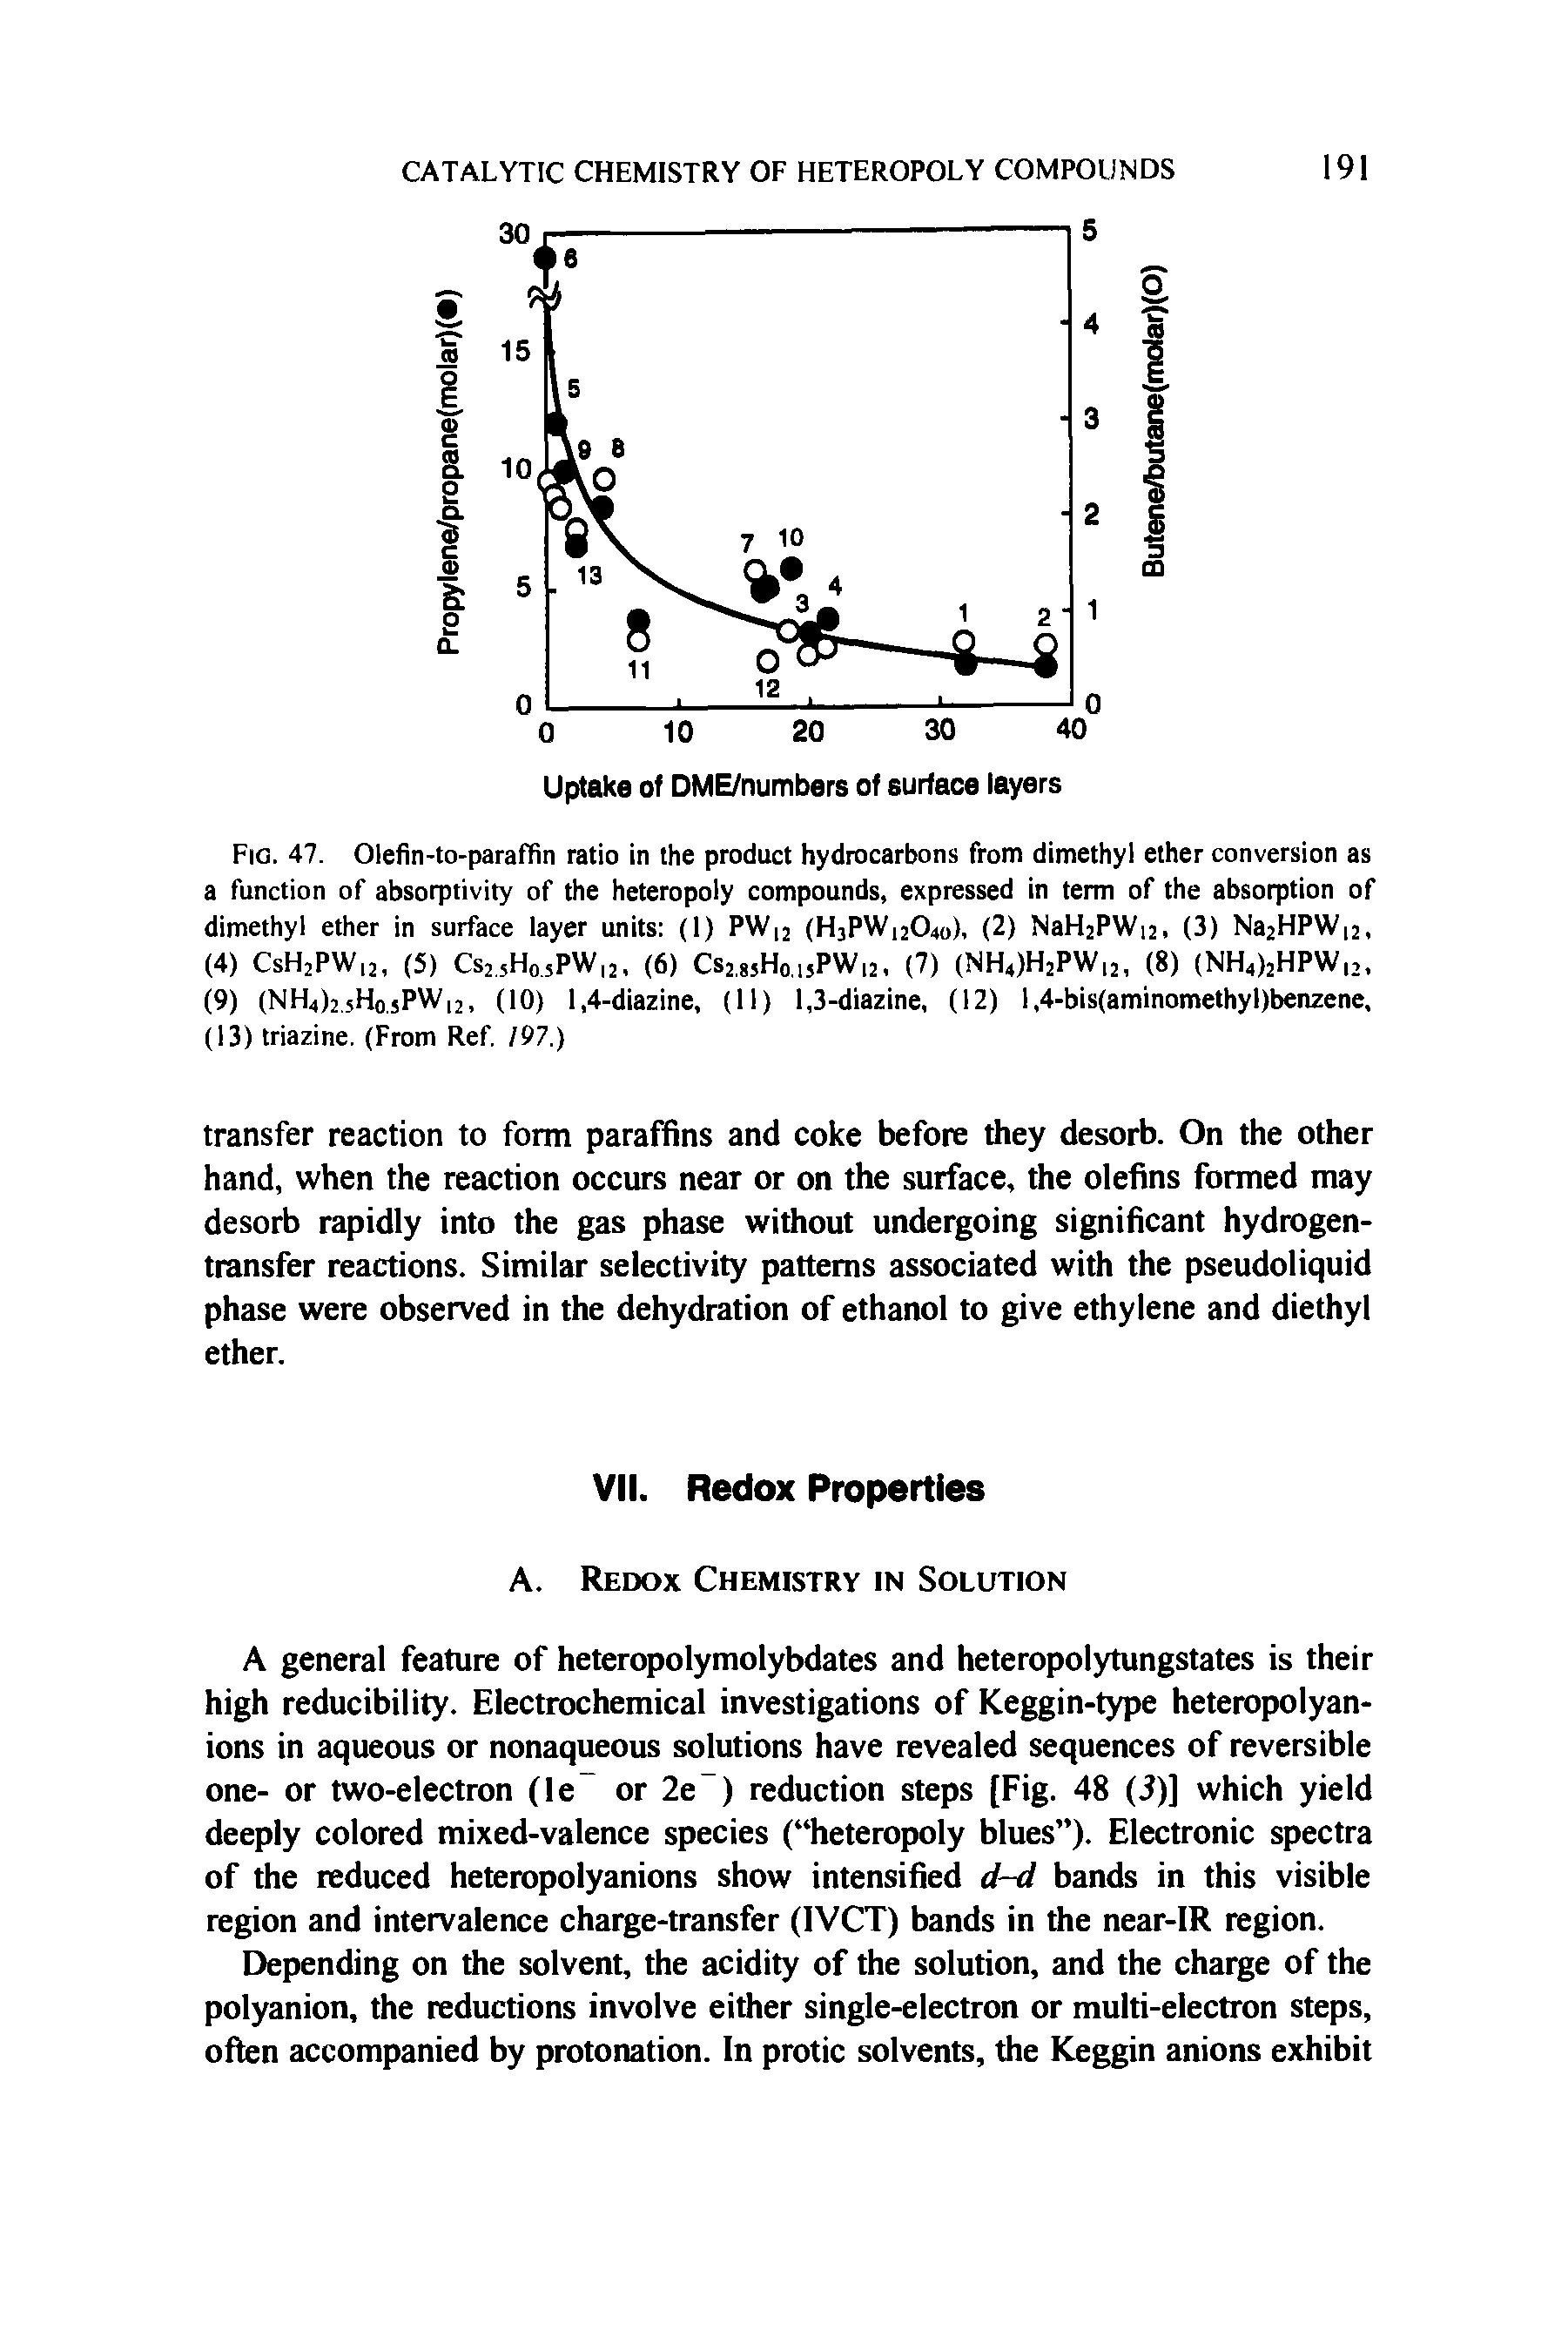 Fig. 47. Olefin-to-paraffin ratio in the product hydrocarbons from dimethyl ether conversion as a function of absorptivity of the heteropoly compounds, expressed in term of the absorption of dimethyl ether in surface layer units (1) PW 2 (H3PW1204o), (2) NaH2PW 2, (3) Na2HPW 2, (4) CsH2PW 2, (5) Cs25H05PWl2, (6) Cs2l8JHo.isPW12, (7) (NH4)H2PW12, (8) (NH4)2HPWI2, (9) (NH4)25Ho.5PW12, (10) 1,4-diazine, (11) 1,3-diazine, (12) 1,4-bis(aminomethyl)benzene, (13) triazine. (From Ref. 197.)...